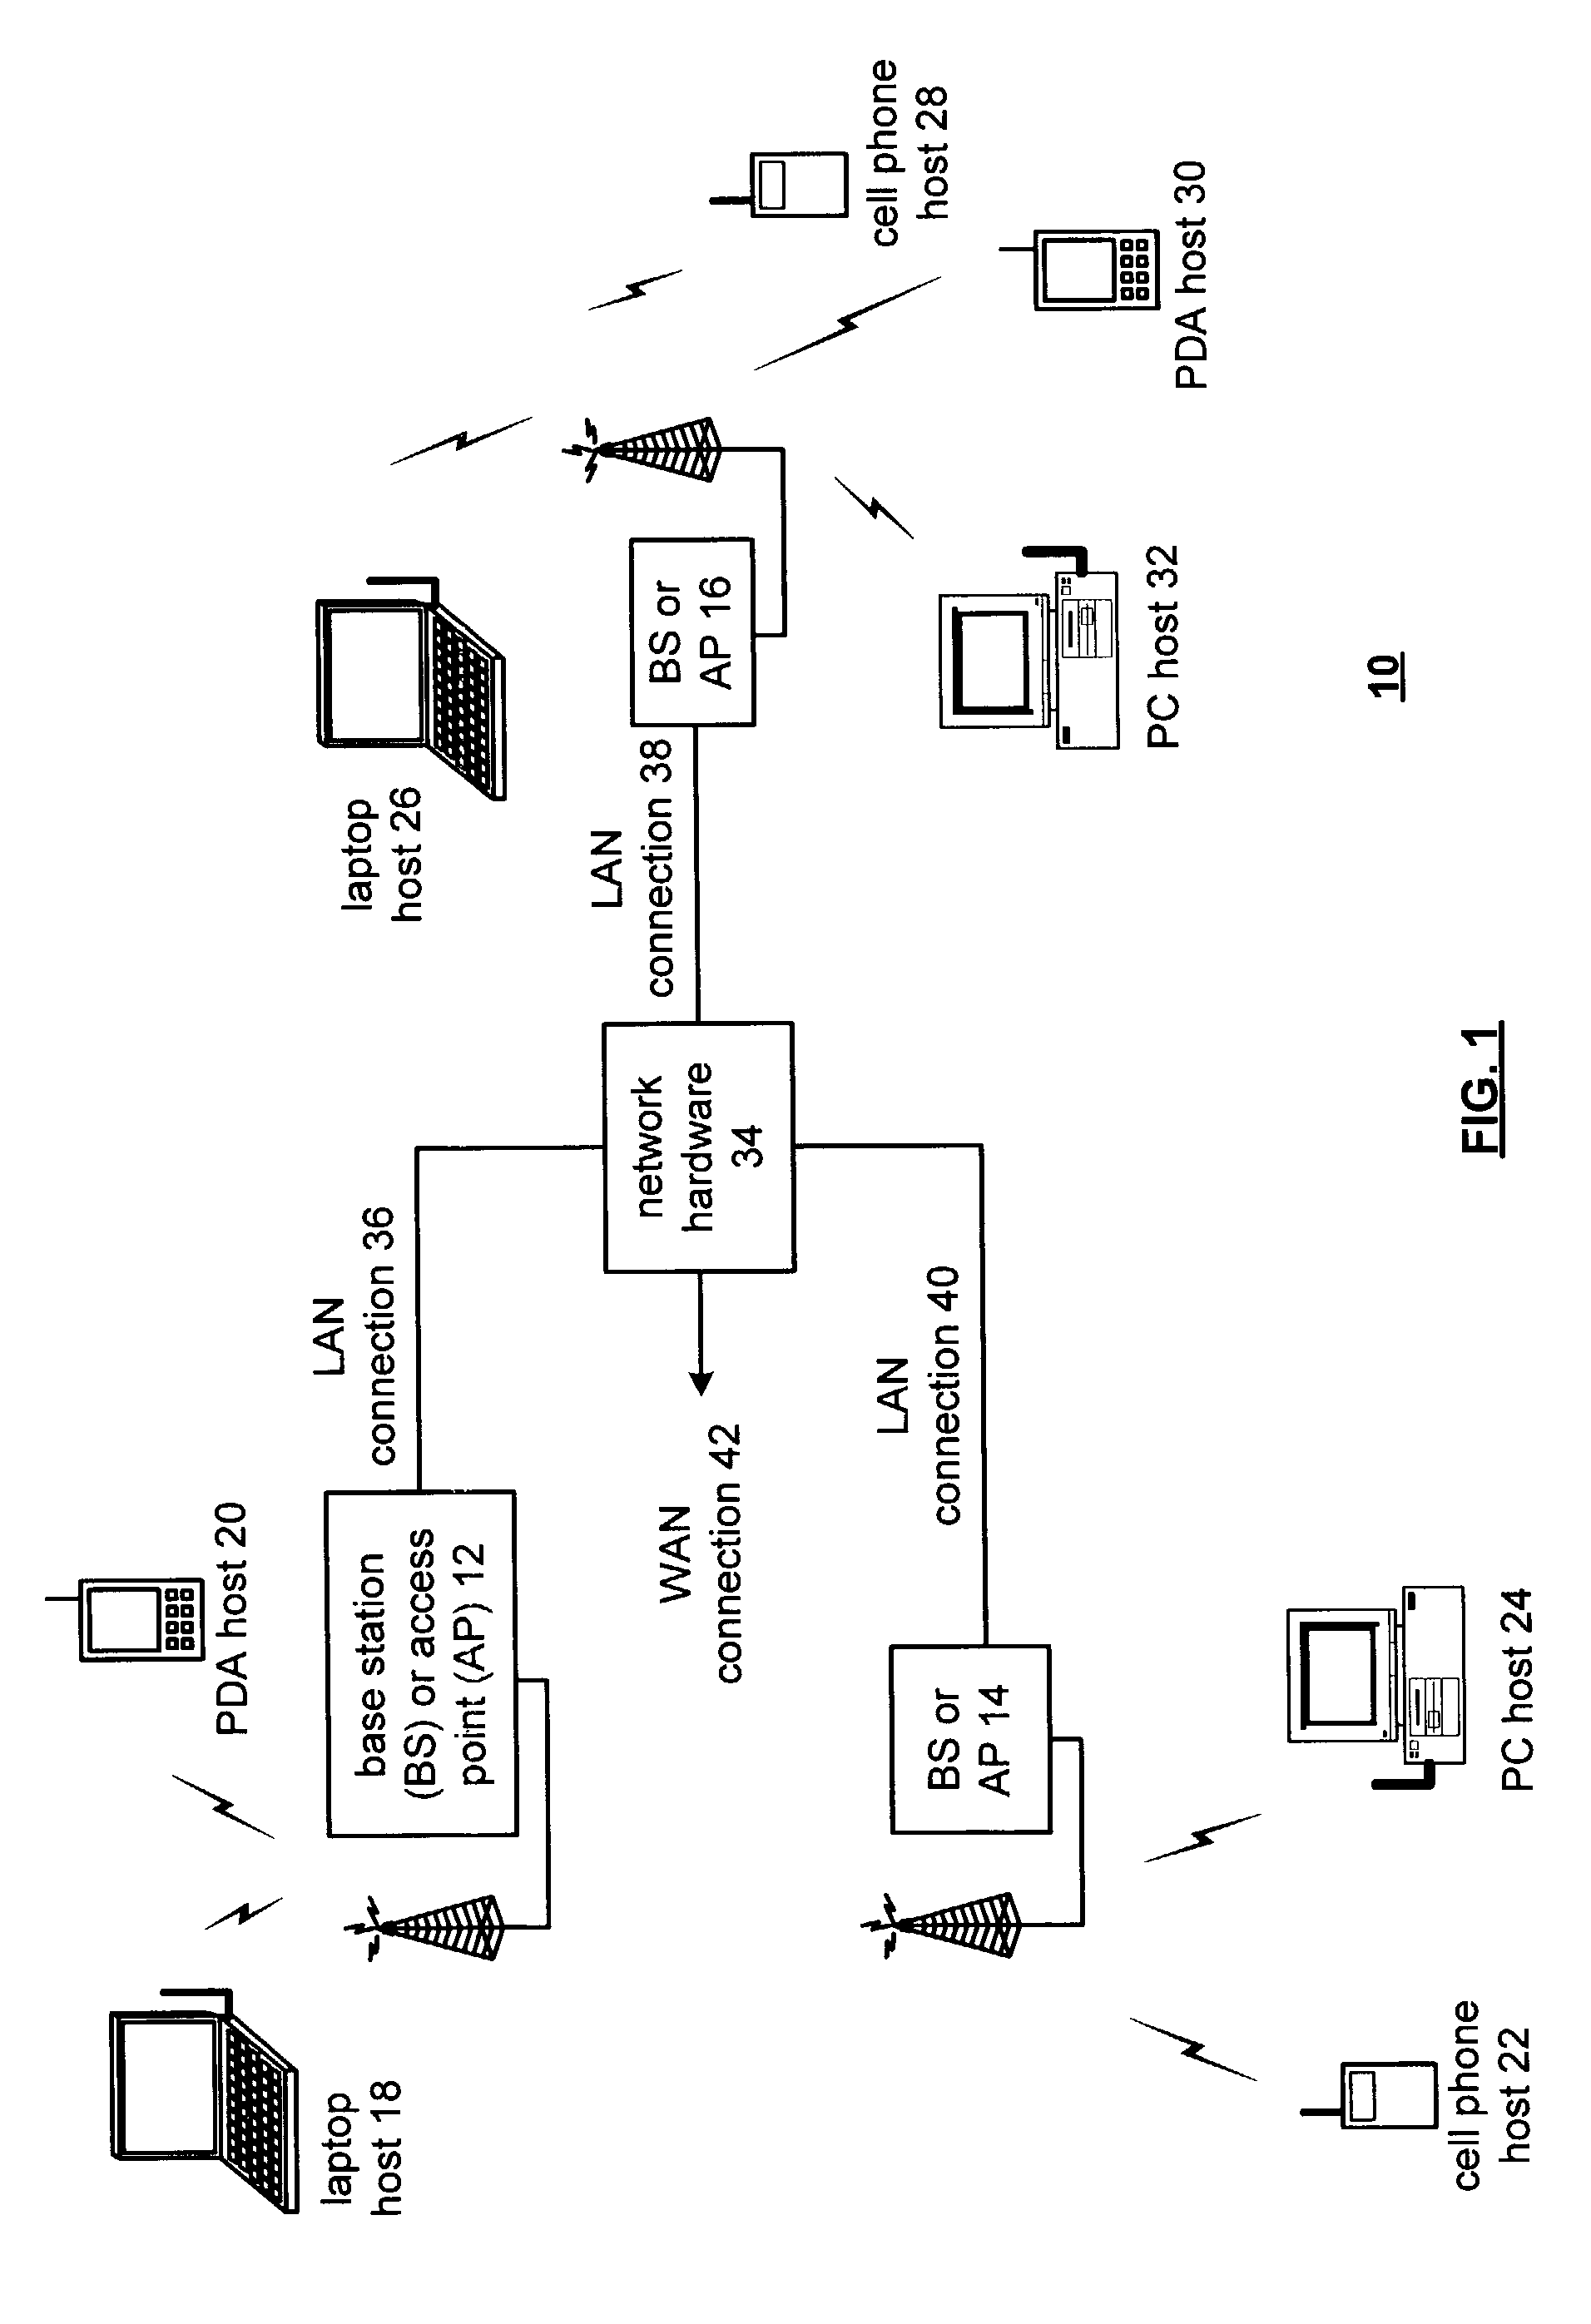 Linear high powered integrated circuit transmitter